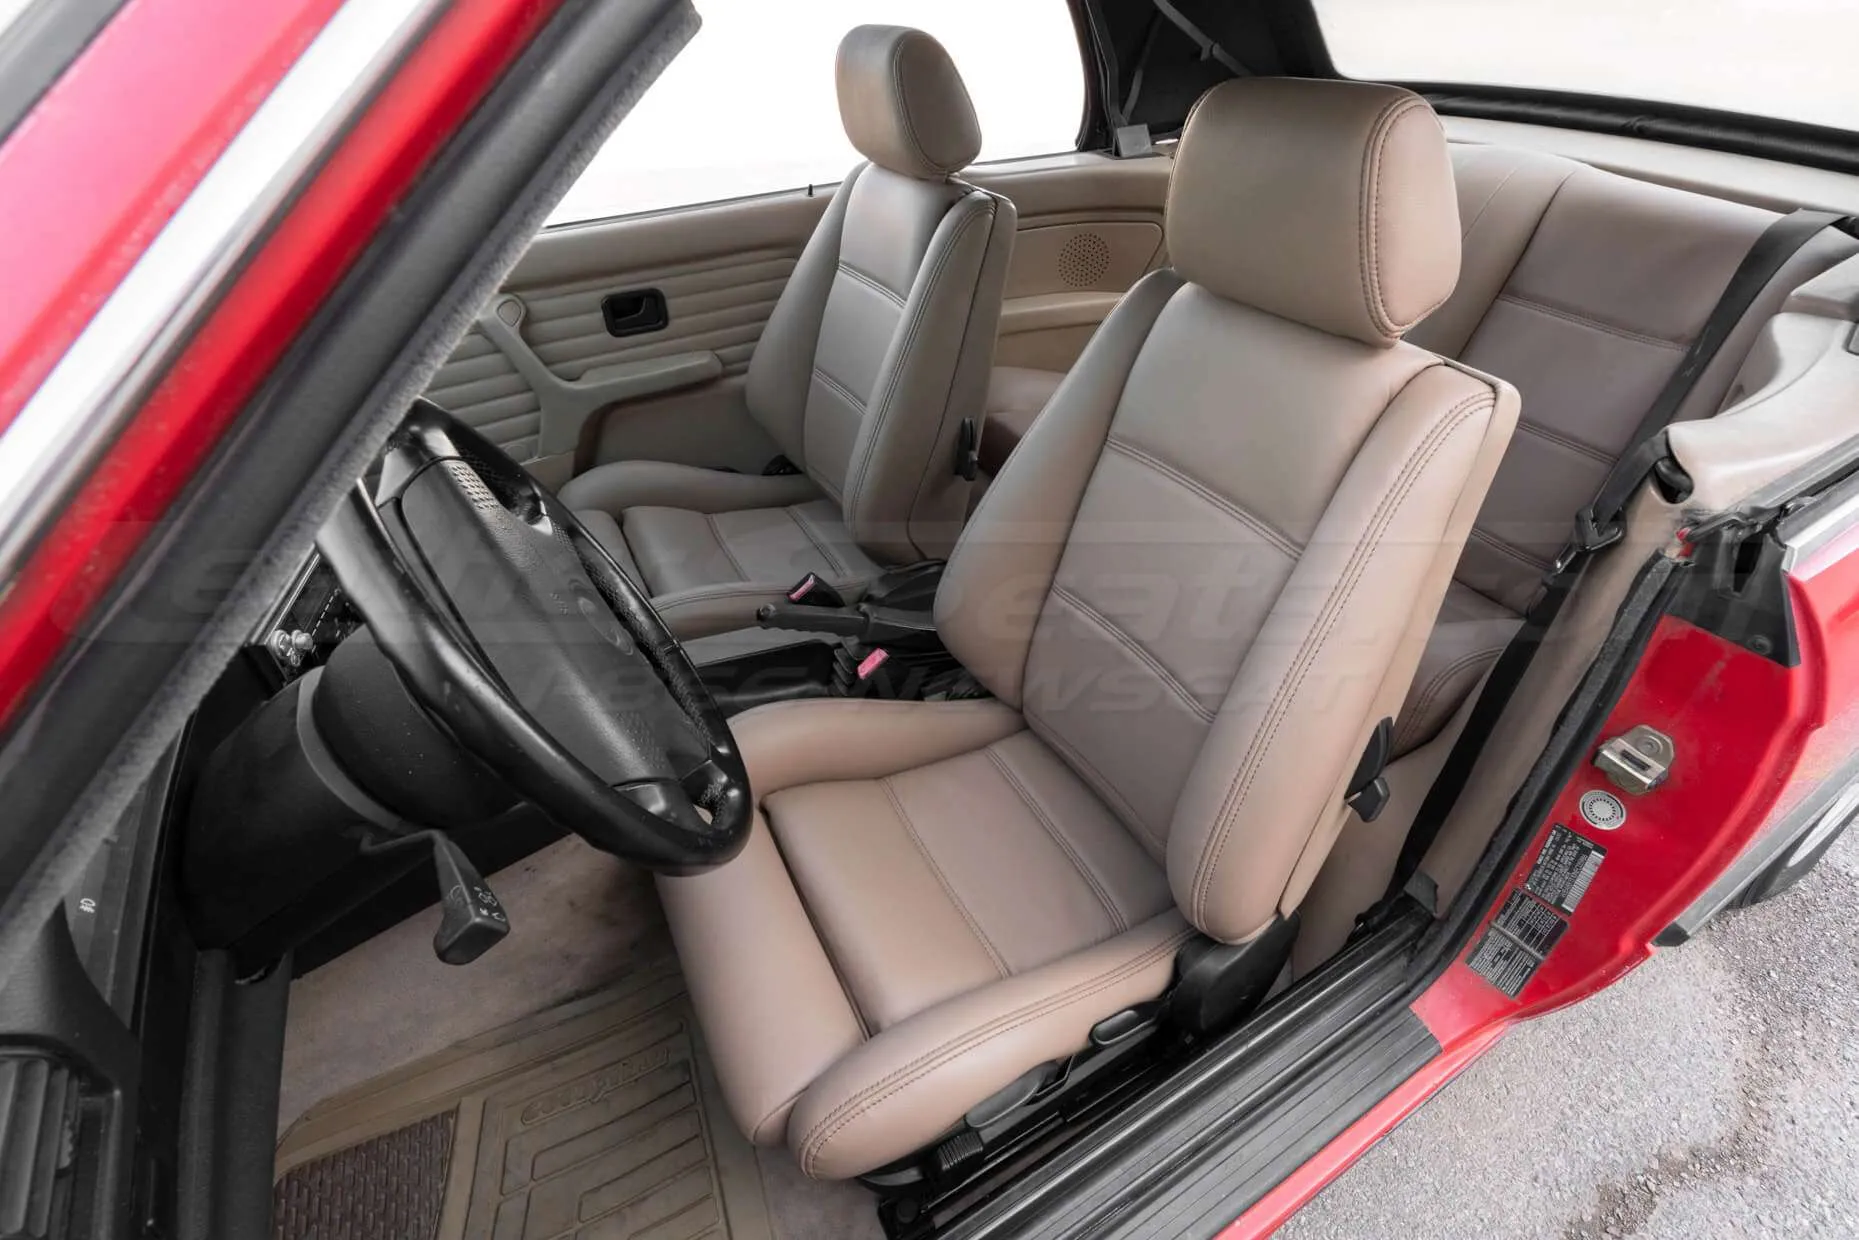 Alternate view of BMW e30 with installed leather seats - front driver